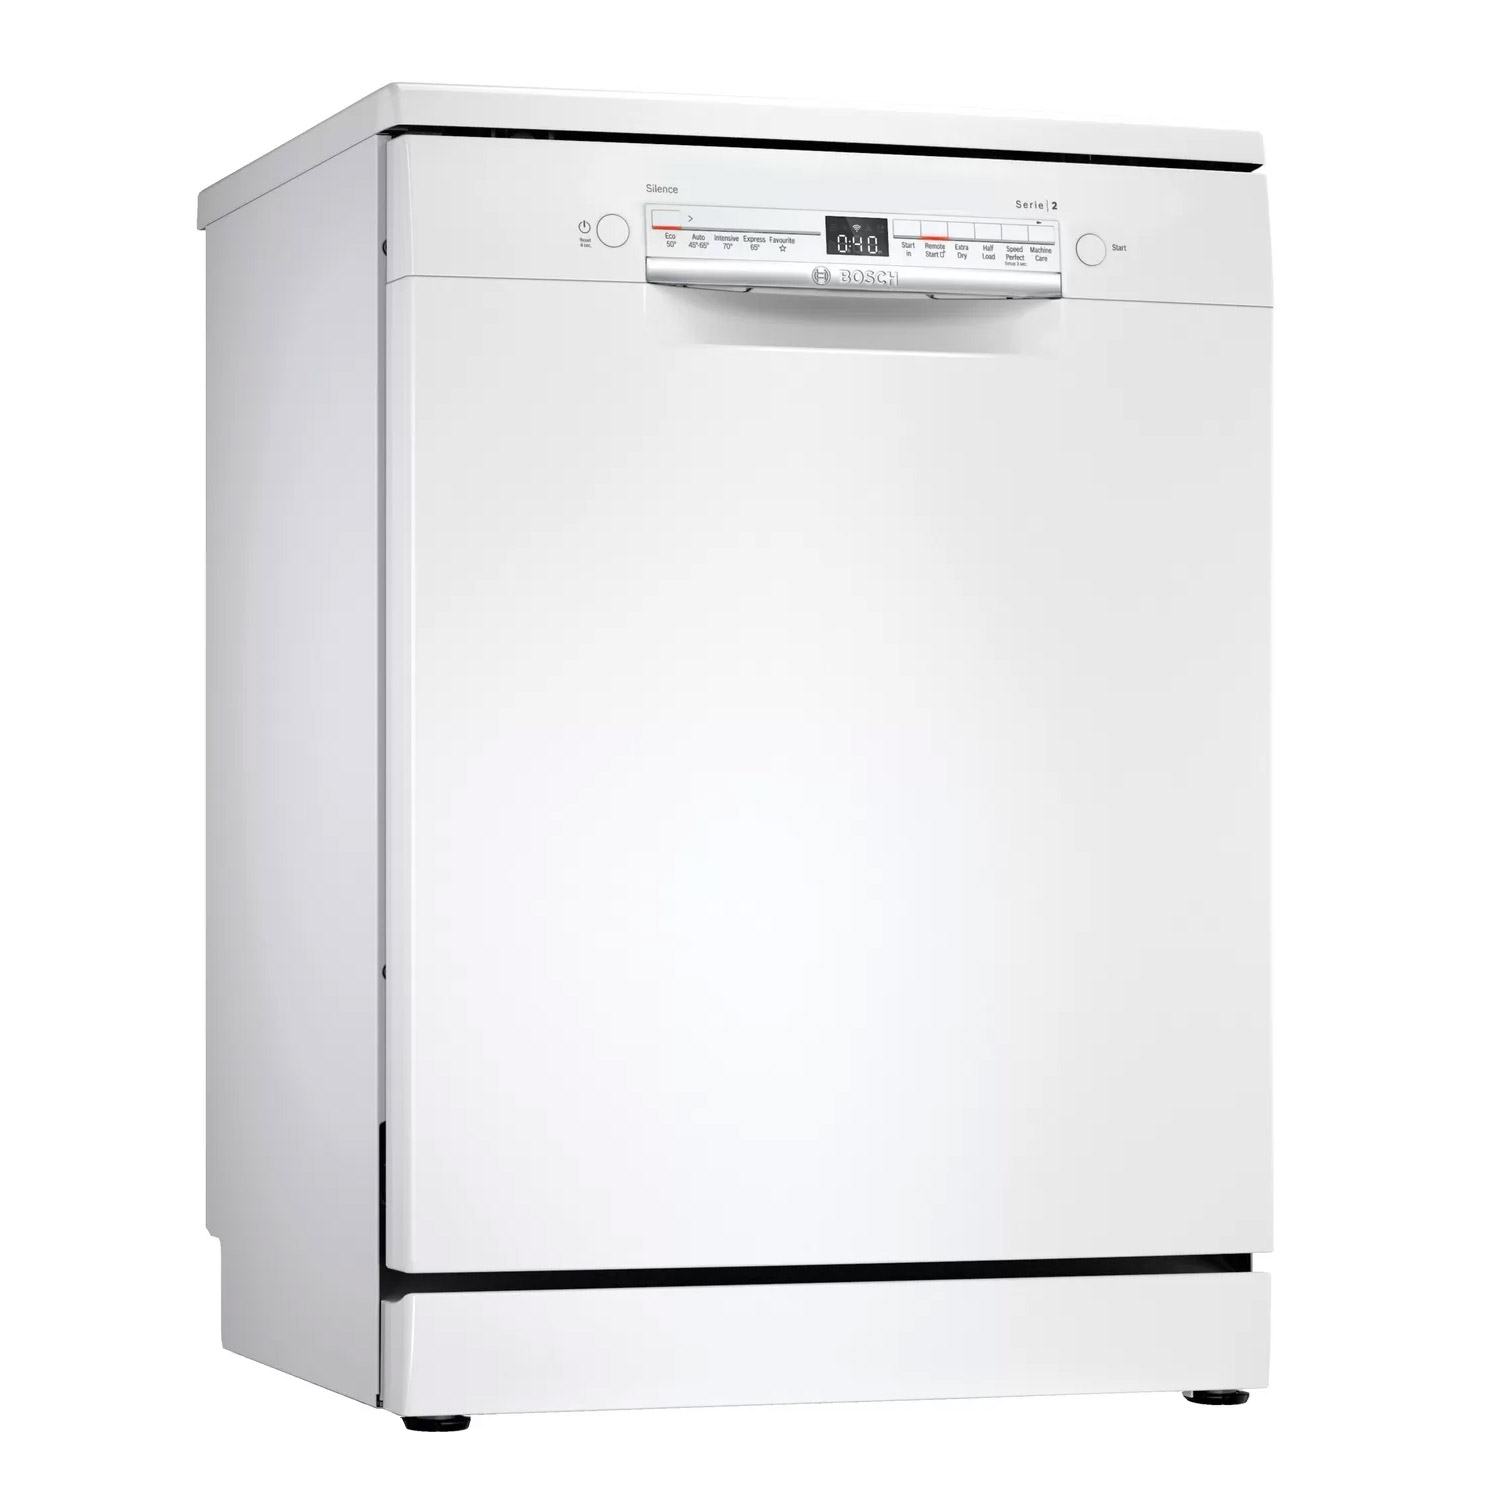 Image of Bosch SMS2ITW41G Series 2 60cm Dishwasher in White 12 Place Setting E